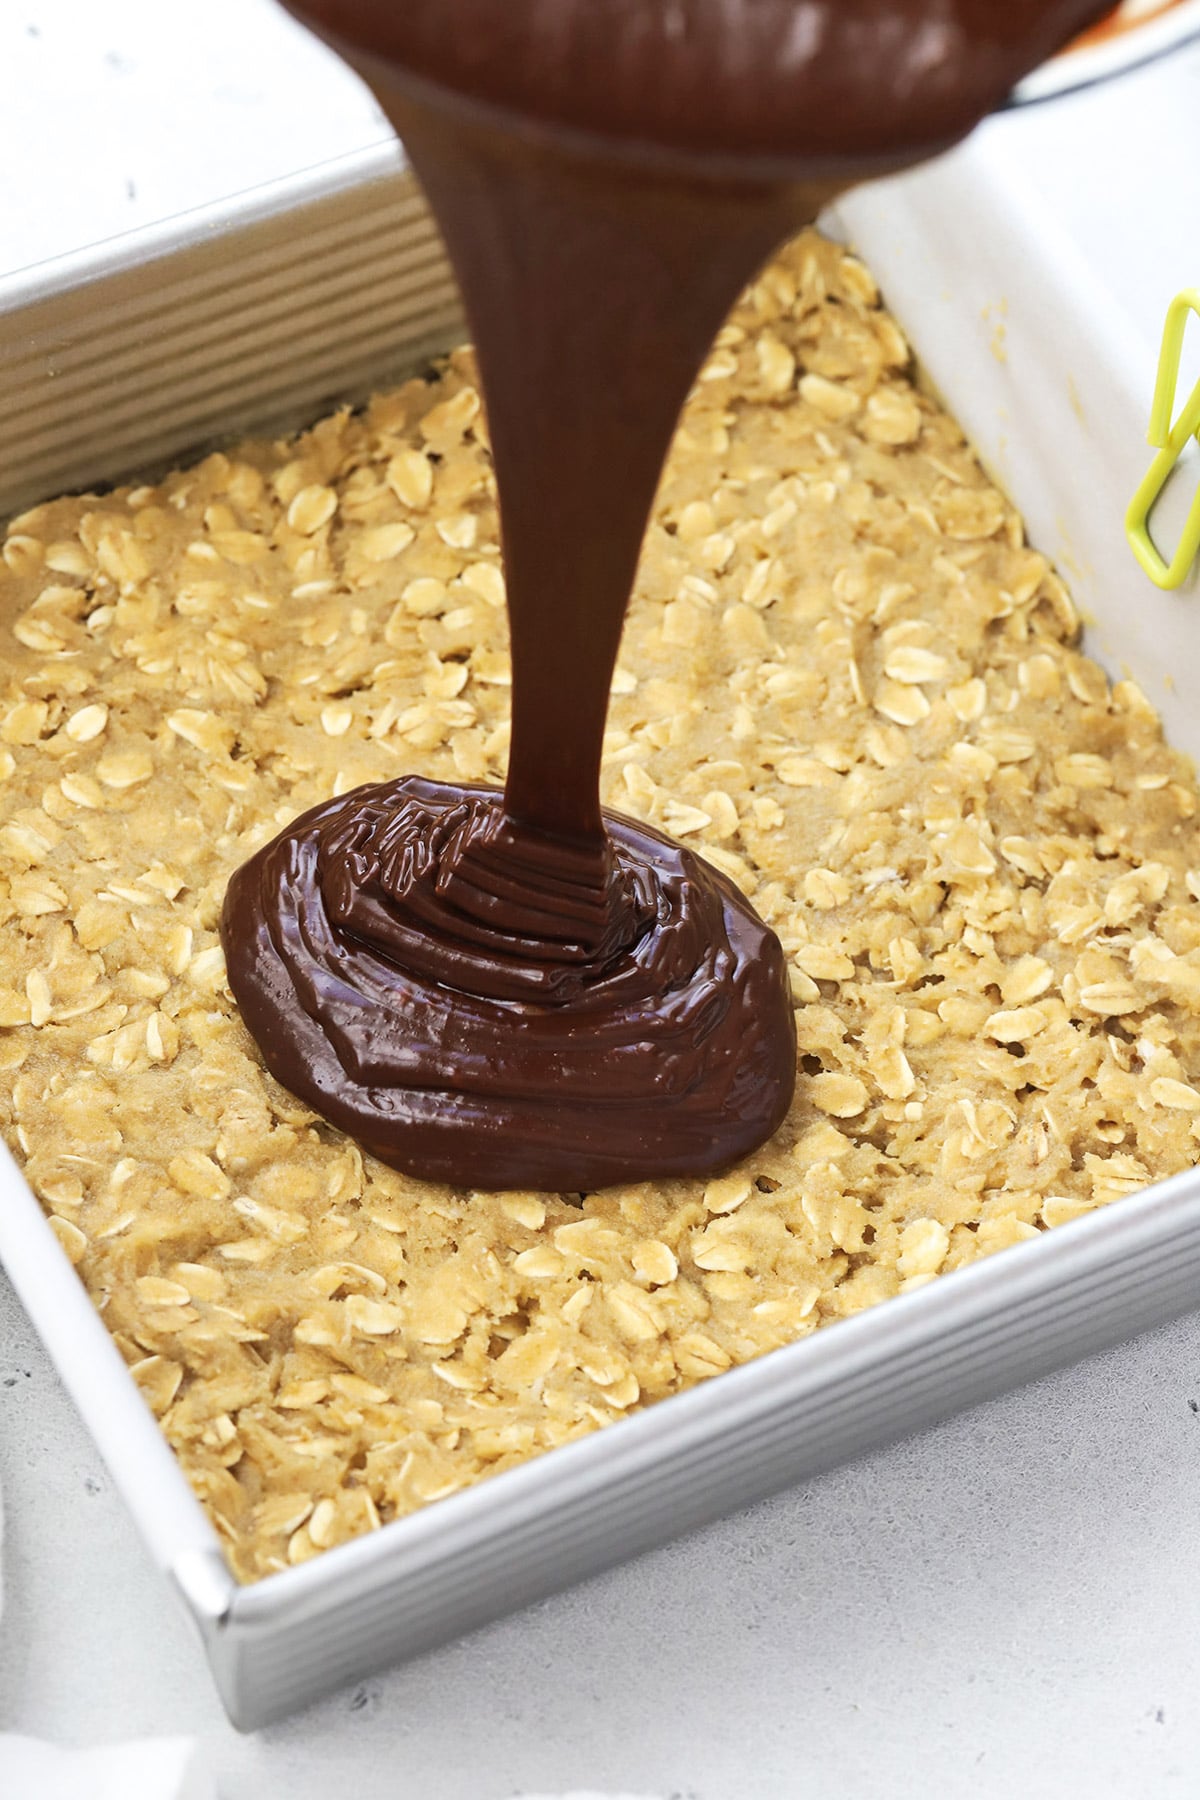 Pouring fudge filling onto an oatmeal cookie base for gluten-free oatmeal fudge bars